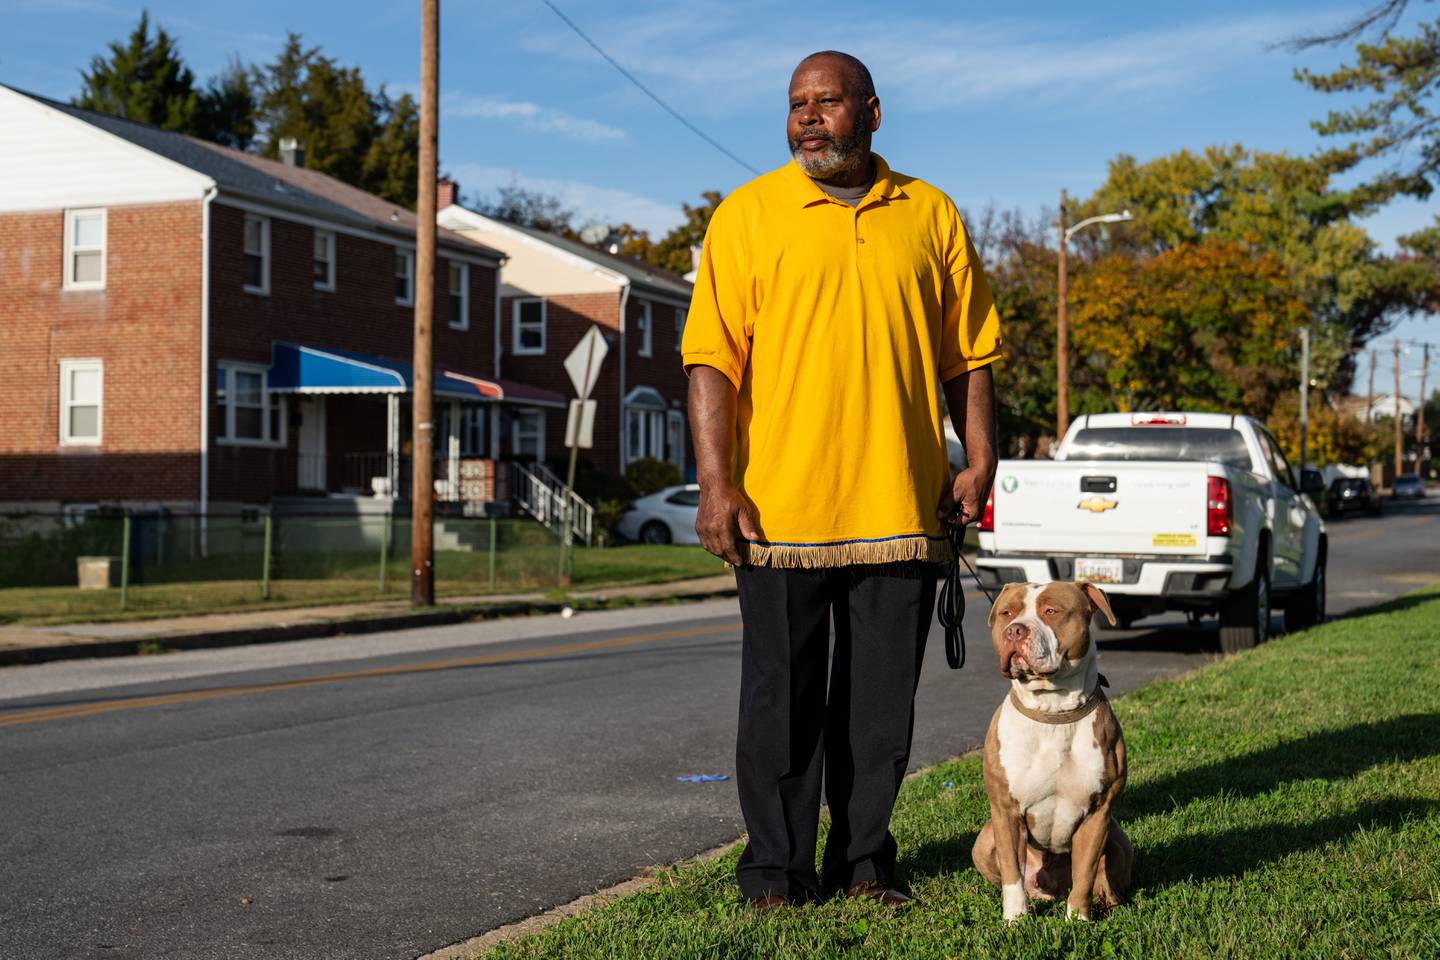 Michael Owens, in a yellow polo, and his white and brown pit bull Champ pose for a portrait on the side of a street, both looking to the left.